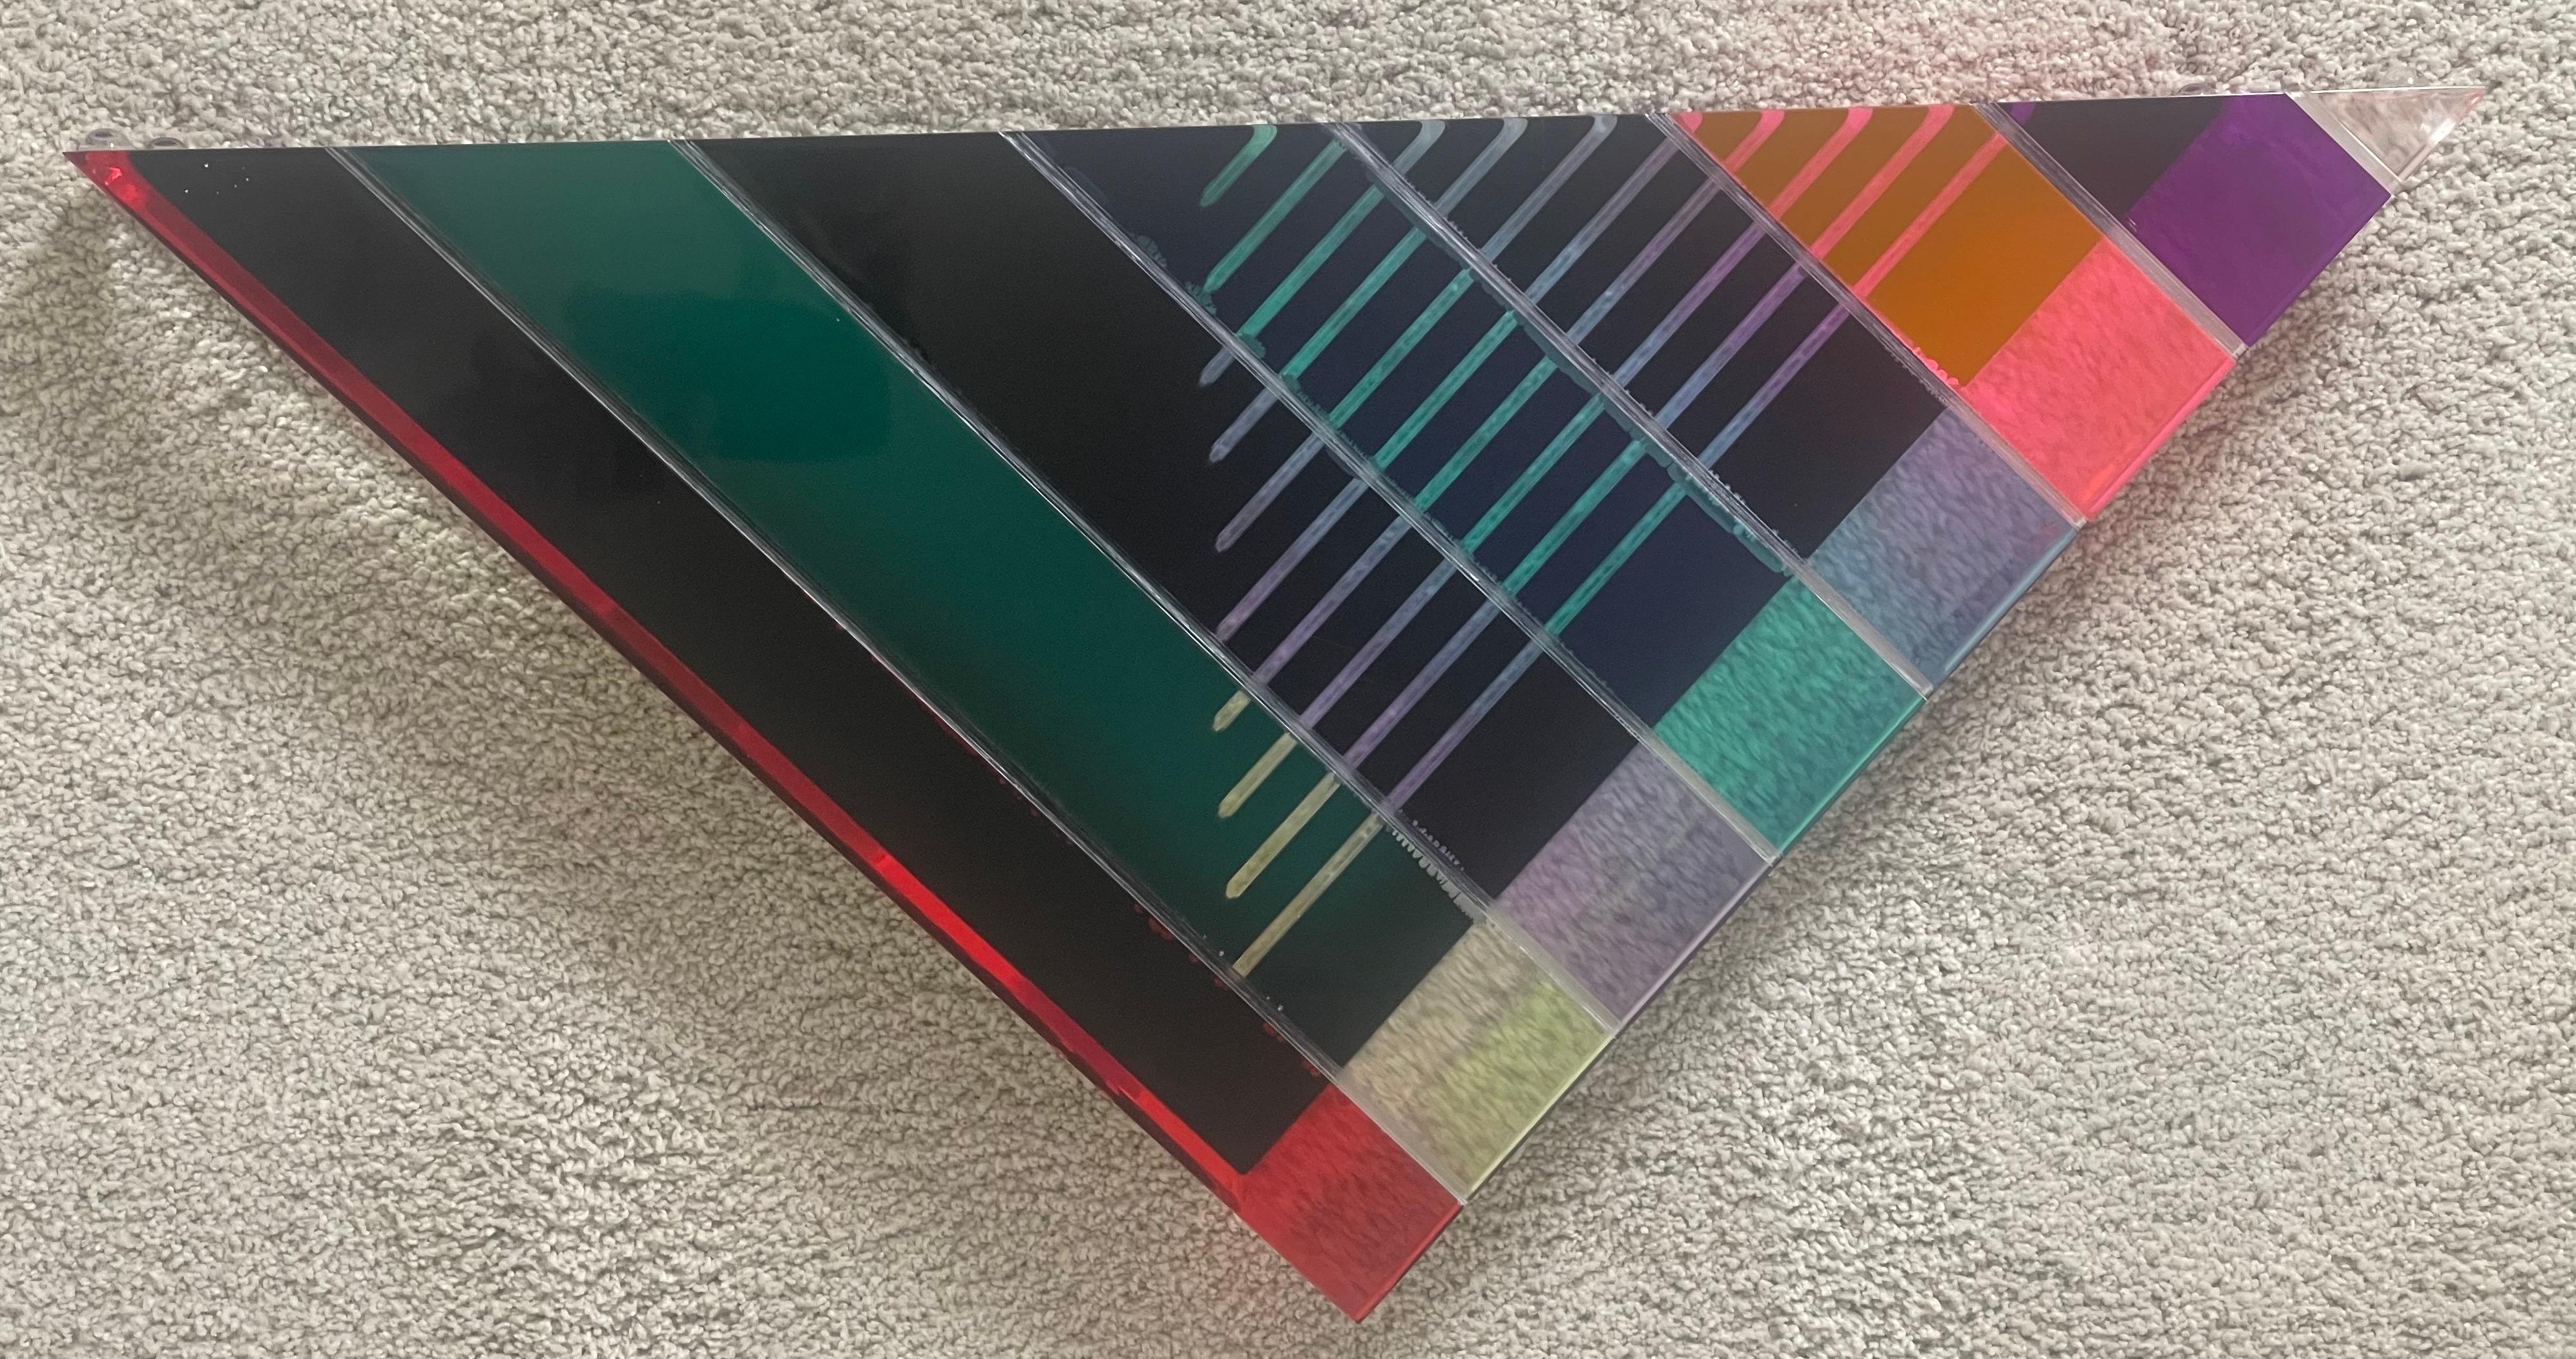 Post-Modern Large Colorful Triangular Lucite Sculpture by Shlomi Haziza For Sale